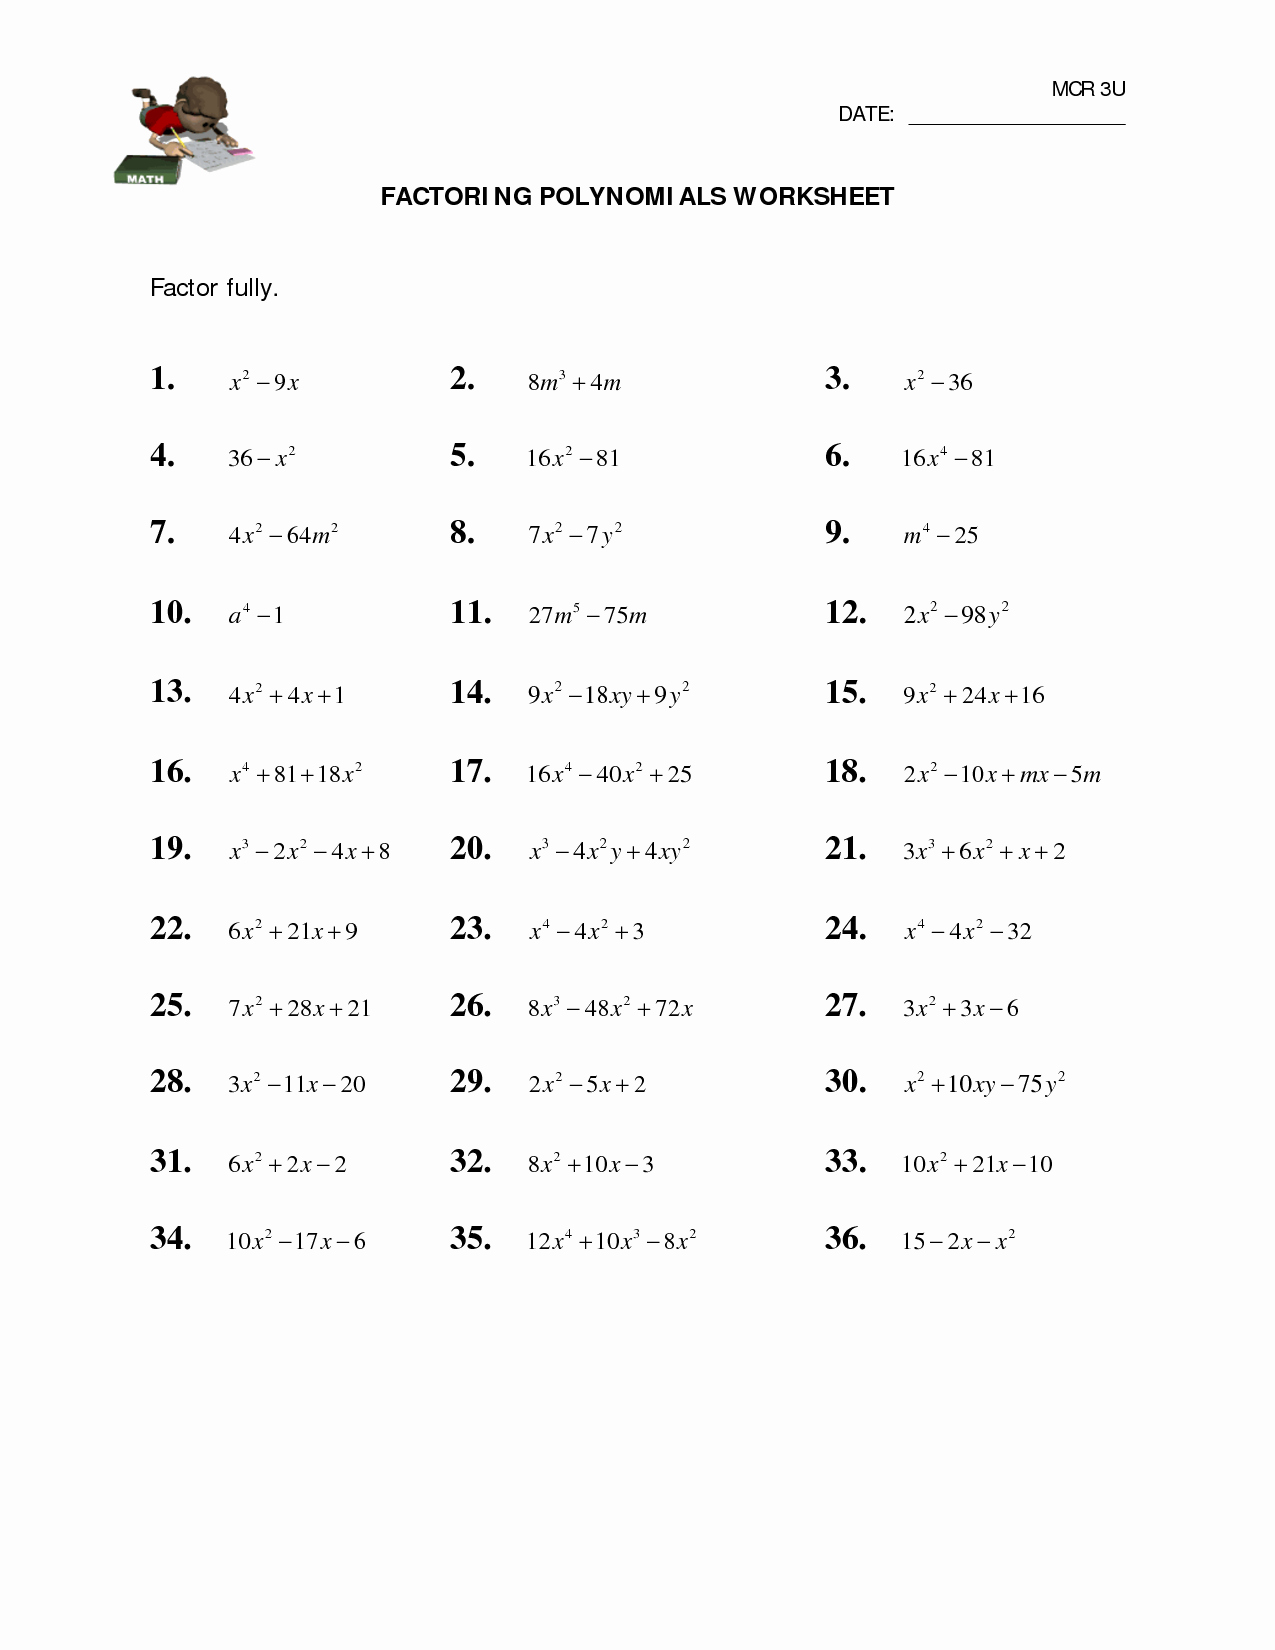 Worksheet Factoring Trinomials Answers Luxury 10 Best Of Factoring Polynomials Practice Worksheet